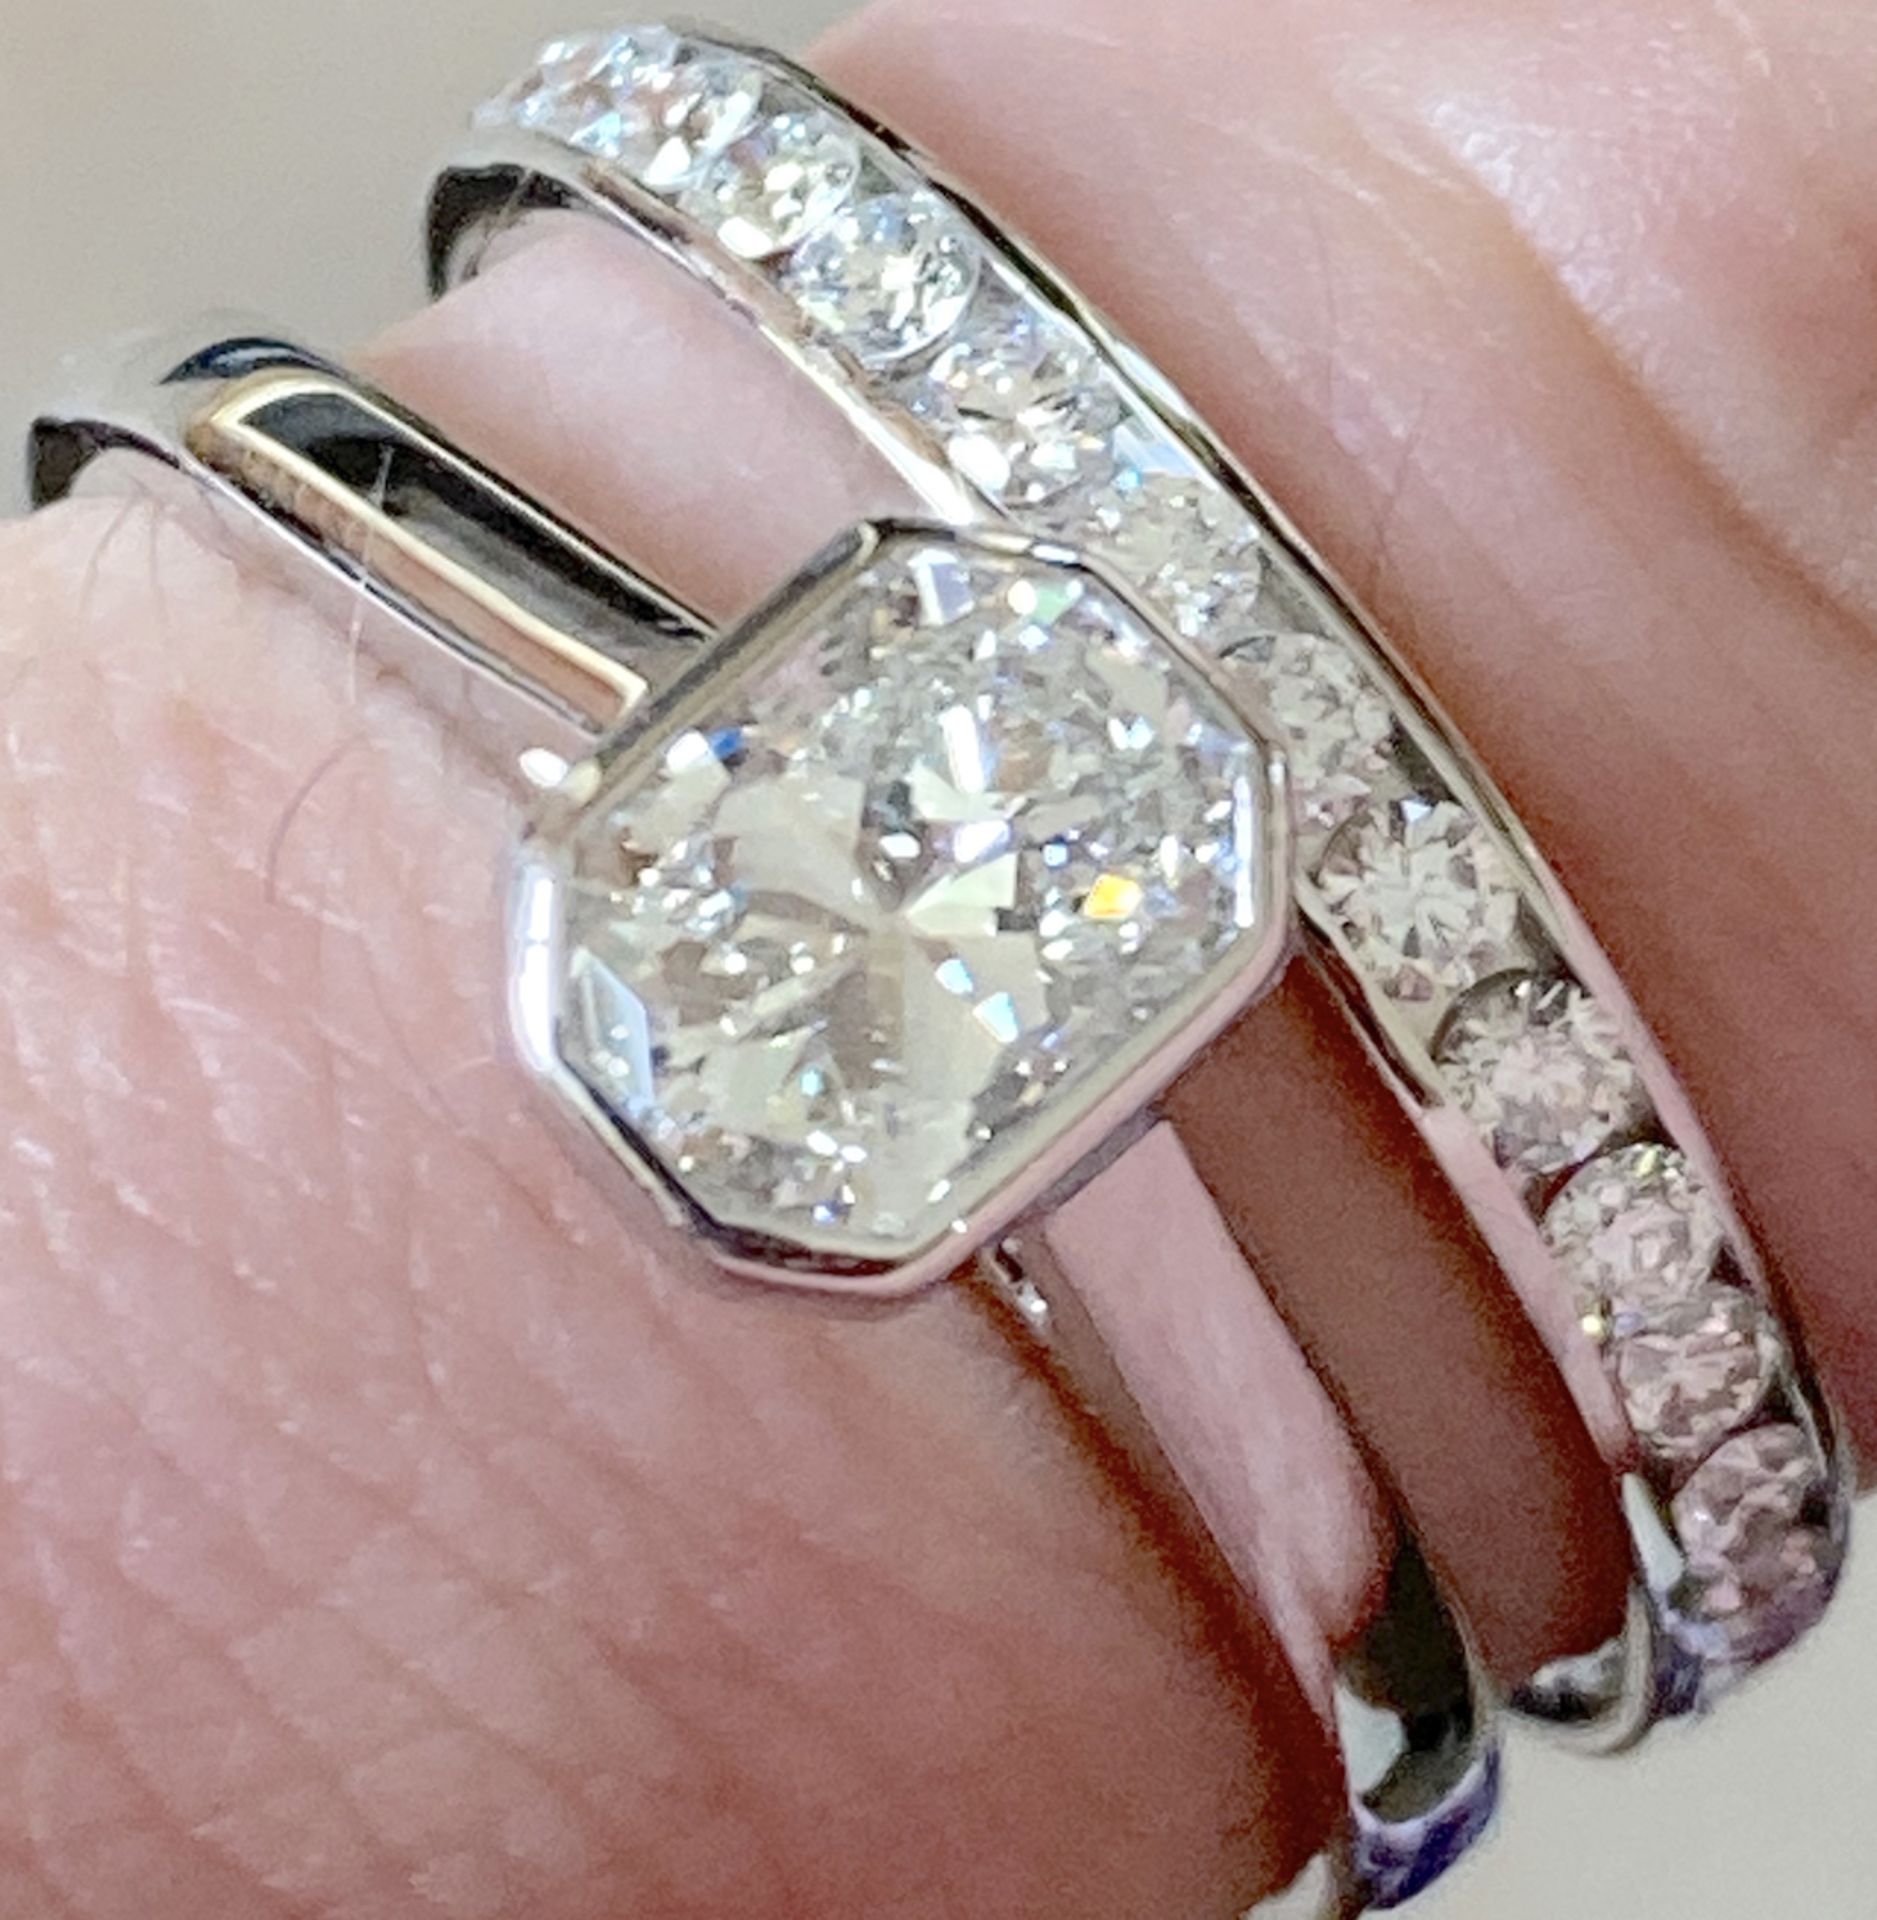 Beautiful Platinum Diamond Ring Set - Solitaire (VVS1) & Band Over 1ct Total (£7,937 Valuation)